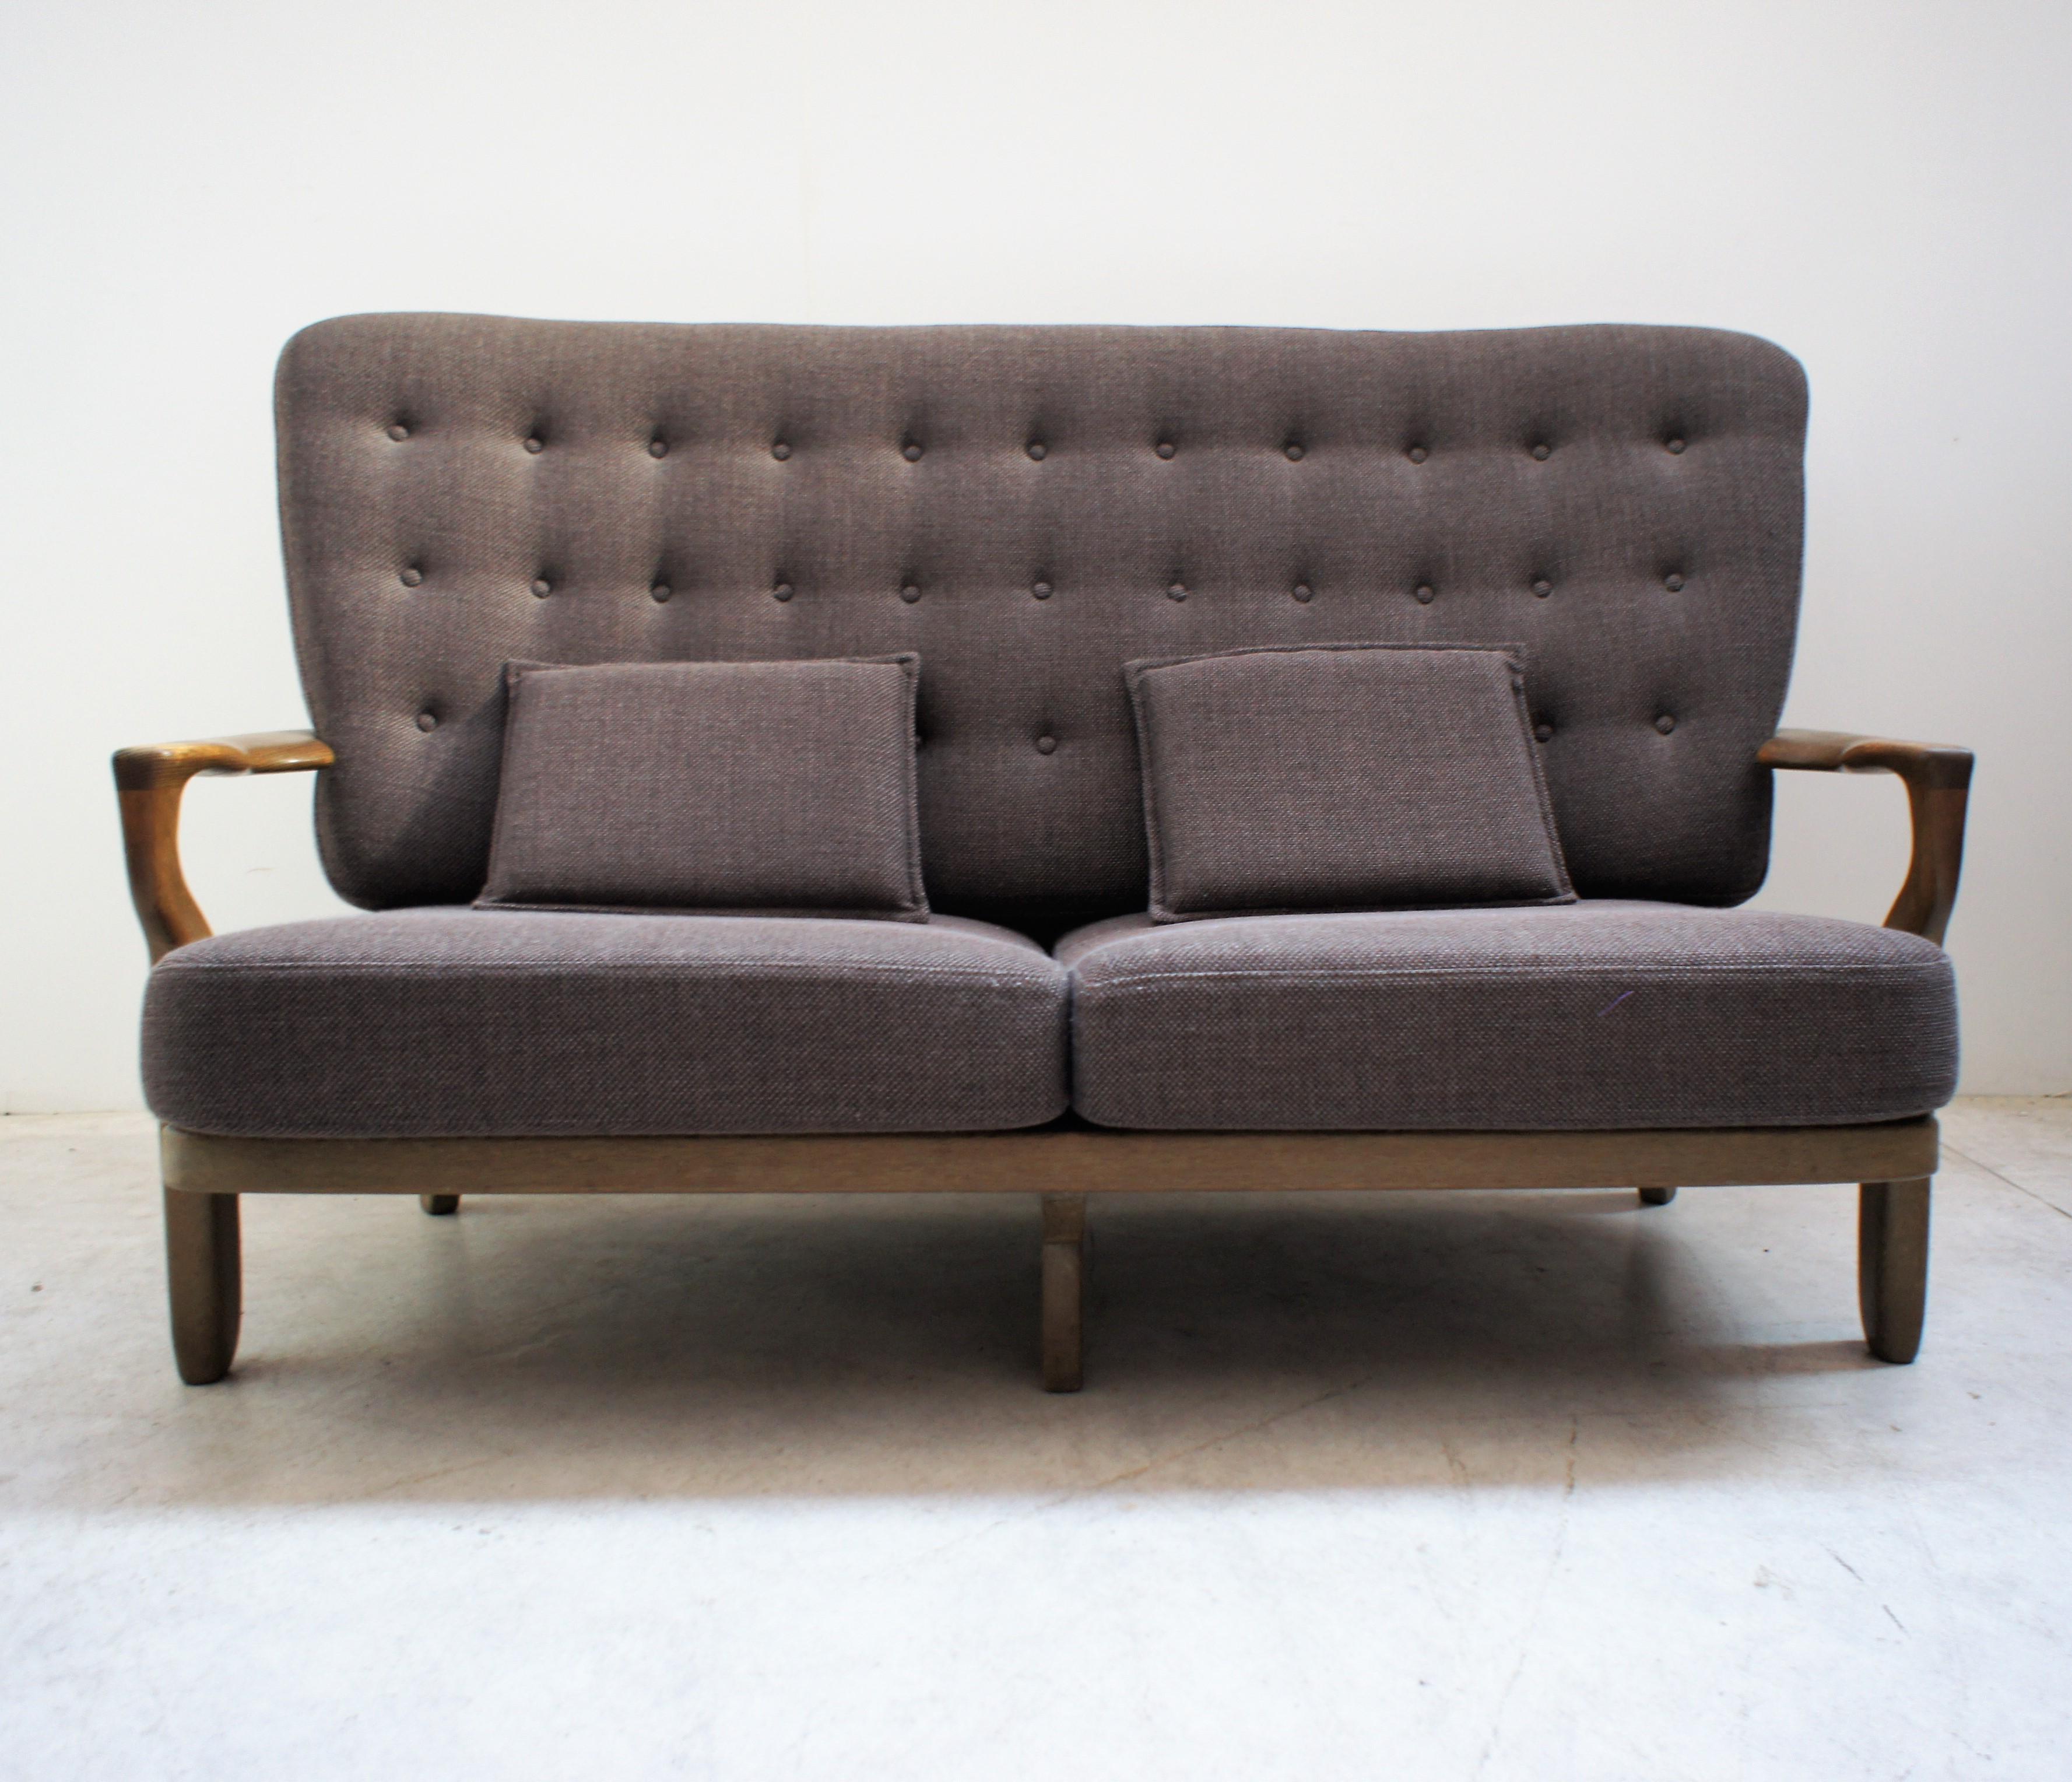 Very nice Juliette sofa by Guillerme and Chambron for 